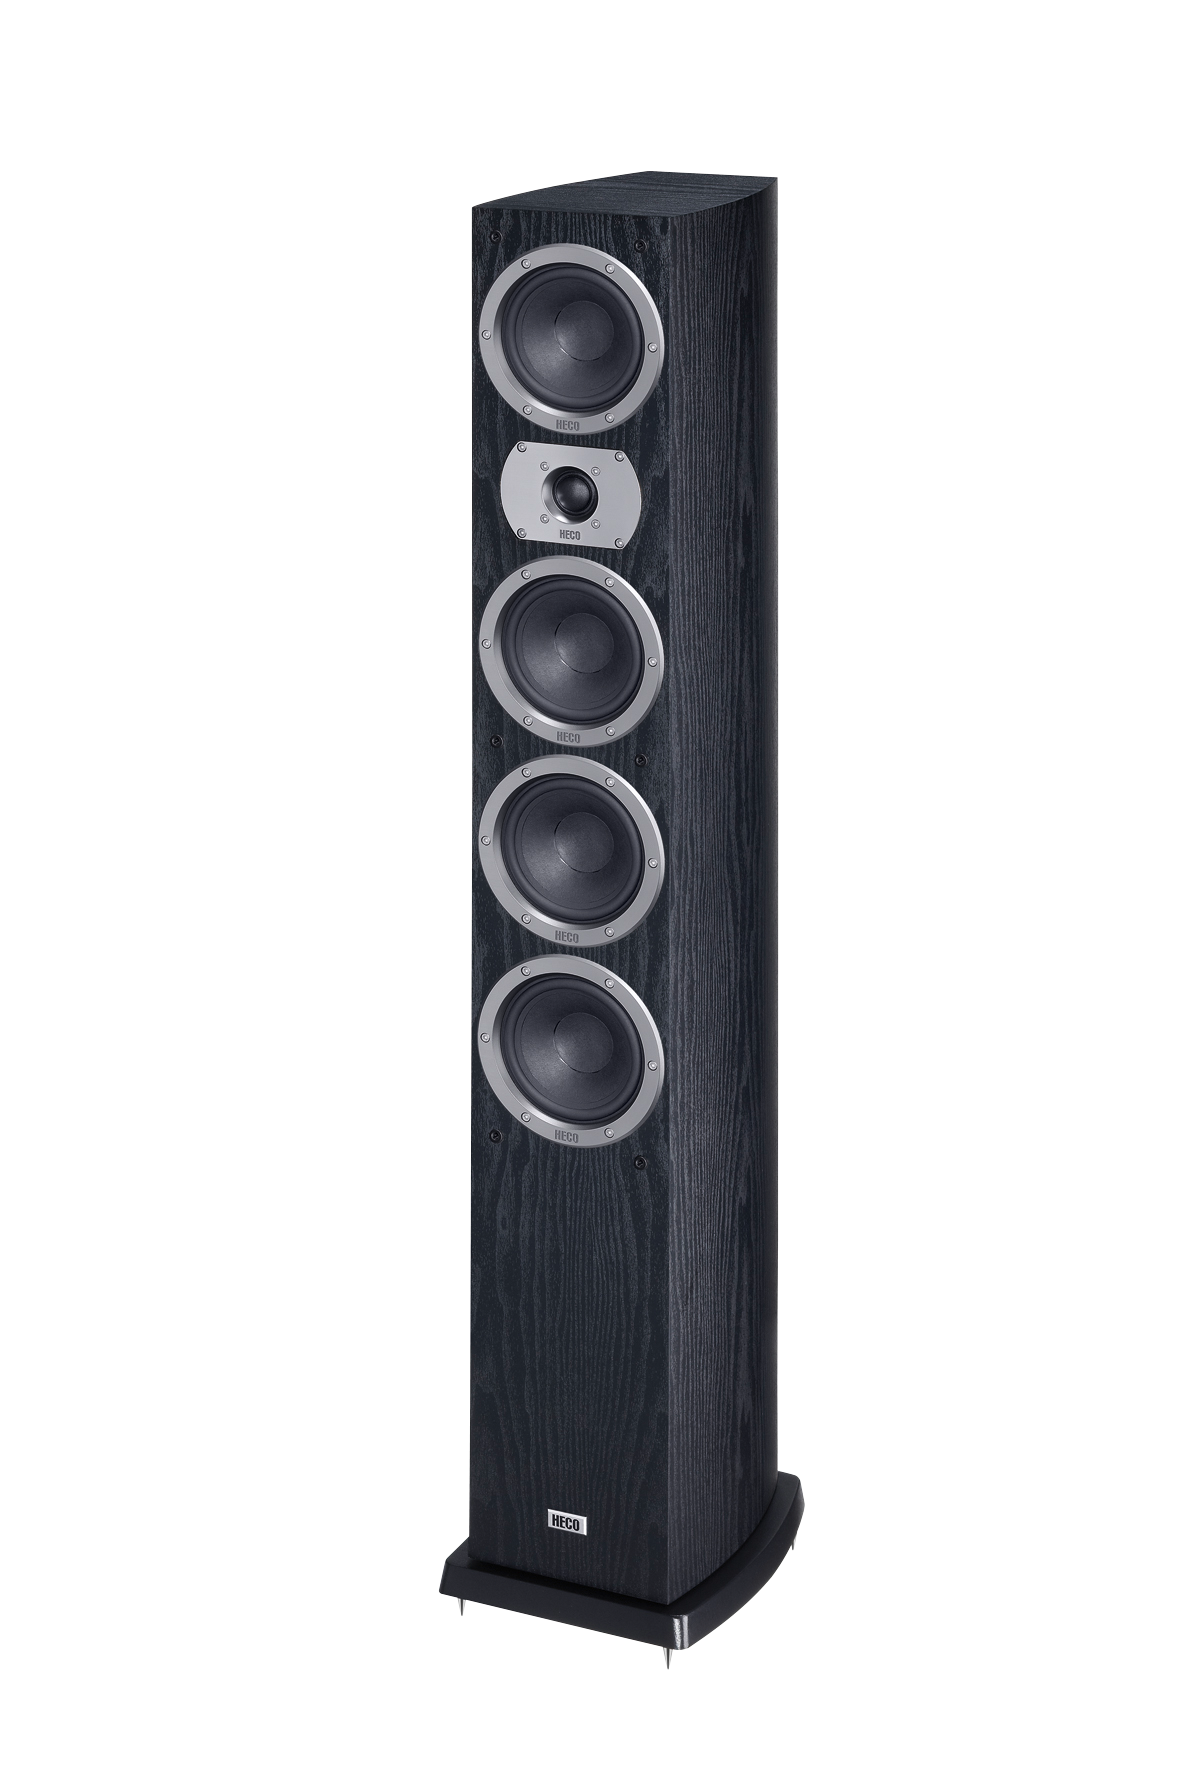 Victa Prime 602, 3-way floorstanding speaker, bass reflex configuration with double bass driver